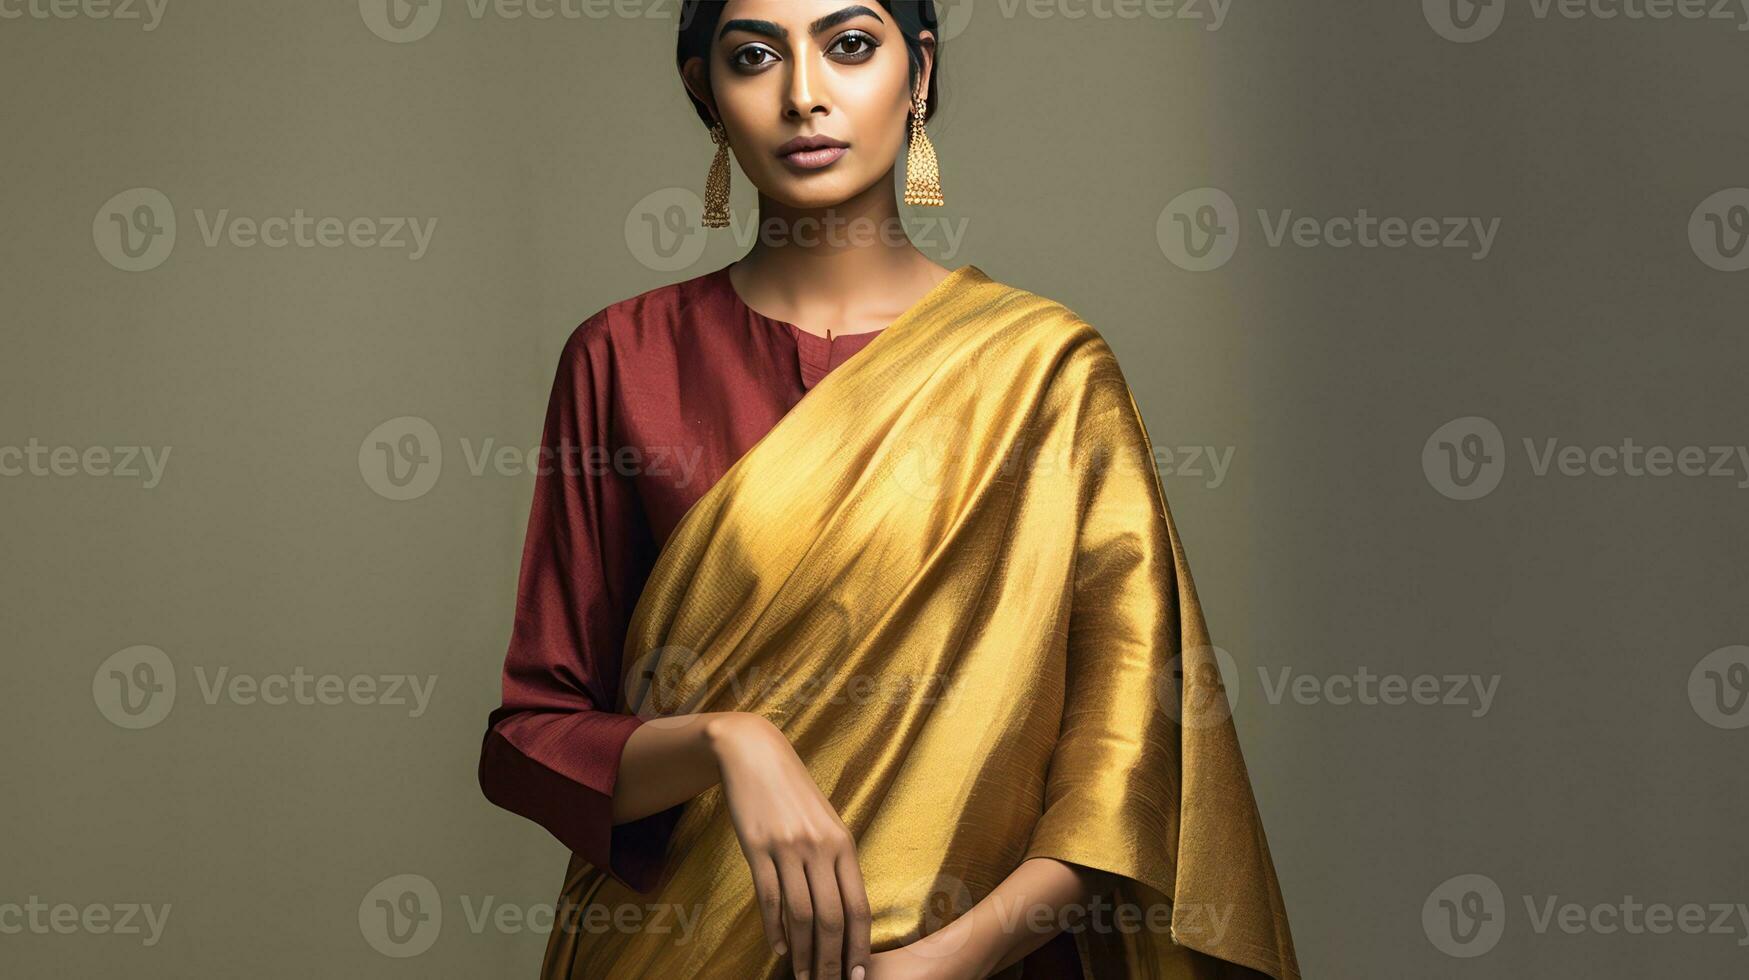 Elegant Indian woman wearing traditional yellow and red sari photo